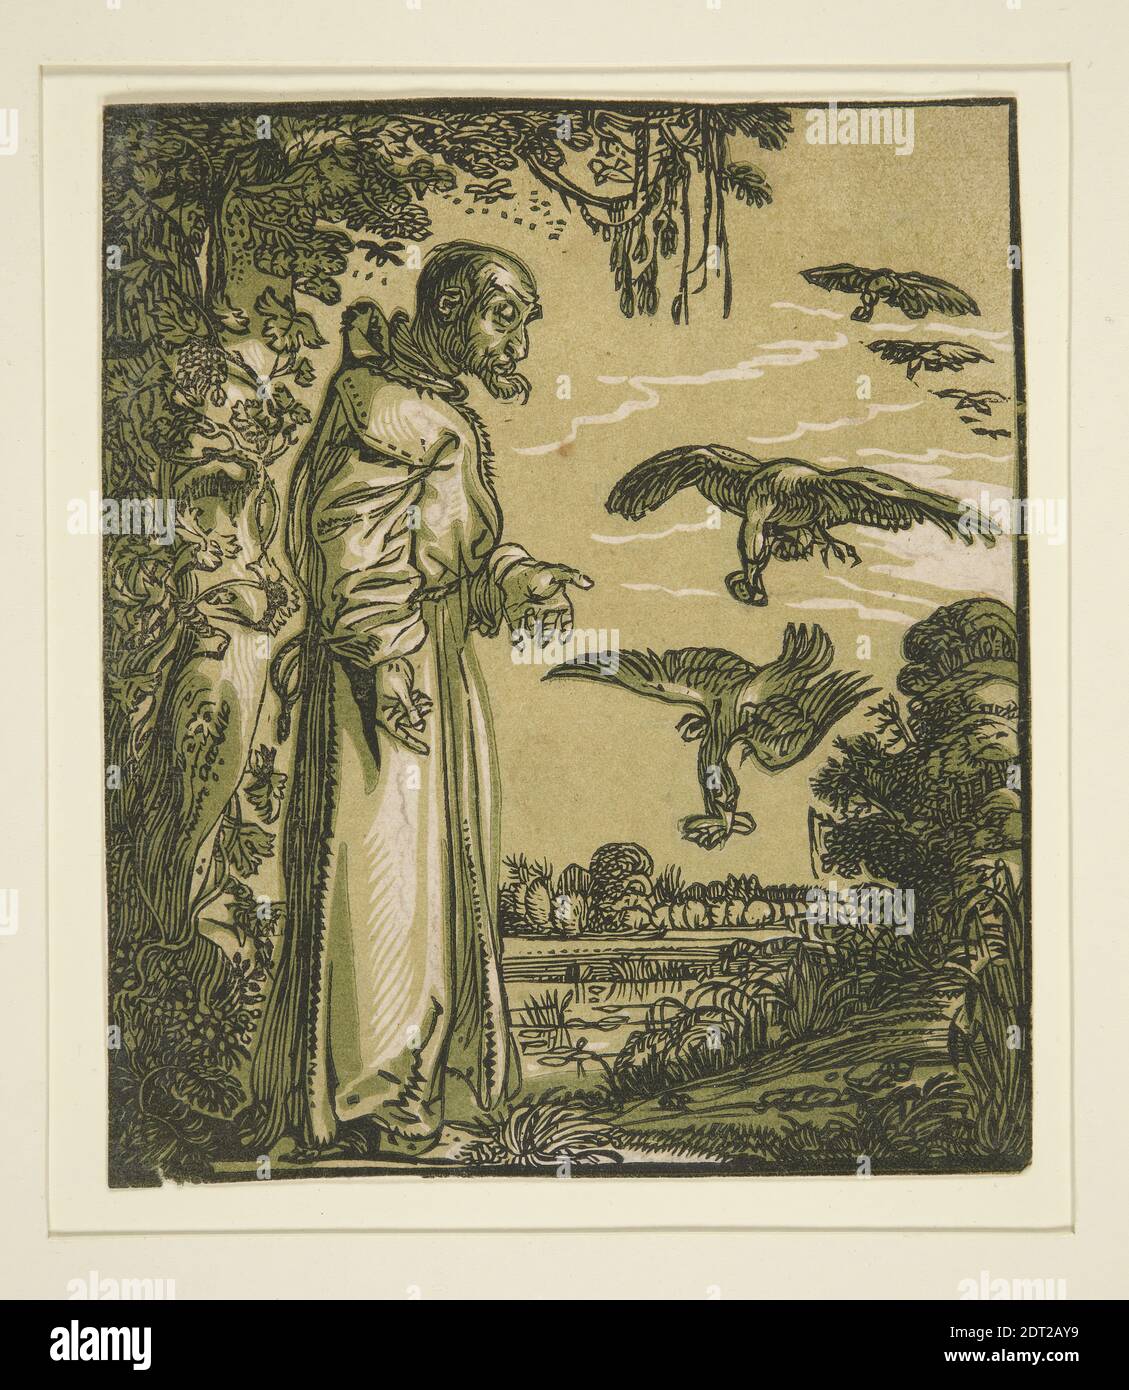 Artist: Willem Pietersz. Buytewech, Dutch, 1590/91–1624, St. Paul the Hermit (Elijah) Fed by the Ravens, Chiaroscuro woodcut, line block and two tone blocks (green/green), block: 14.9 × 12.7 cm (5 7/8 × 5 in.), Made in The Netherlands, Dutch, 16th century, Works on Paper - Prints Stock Photo